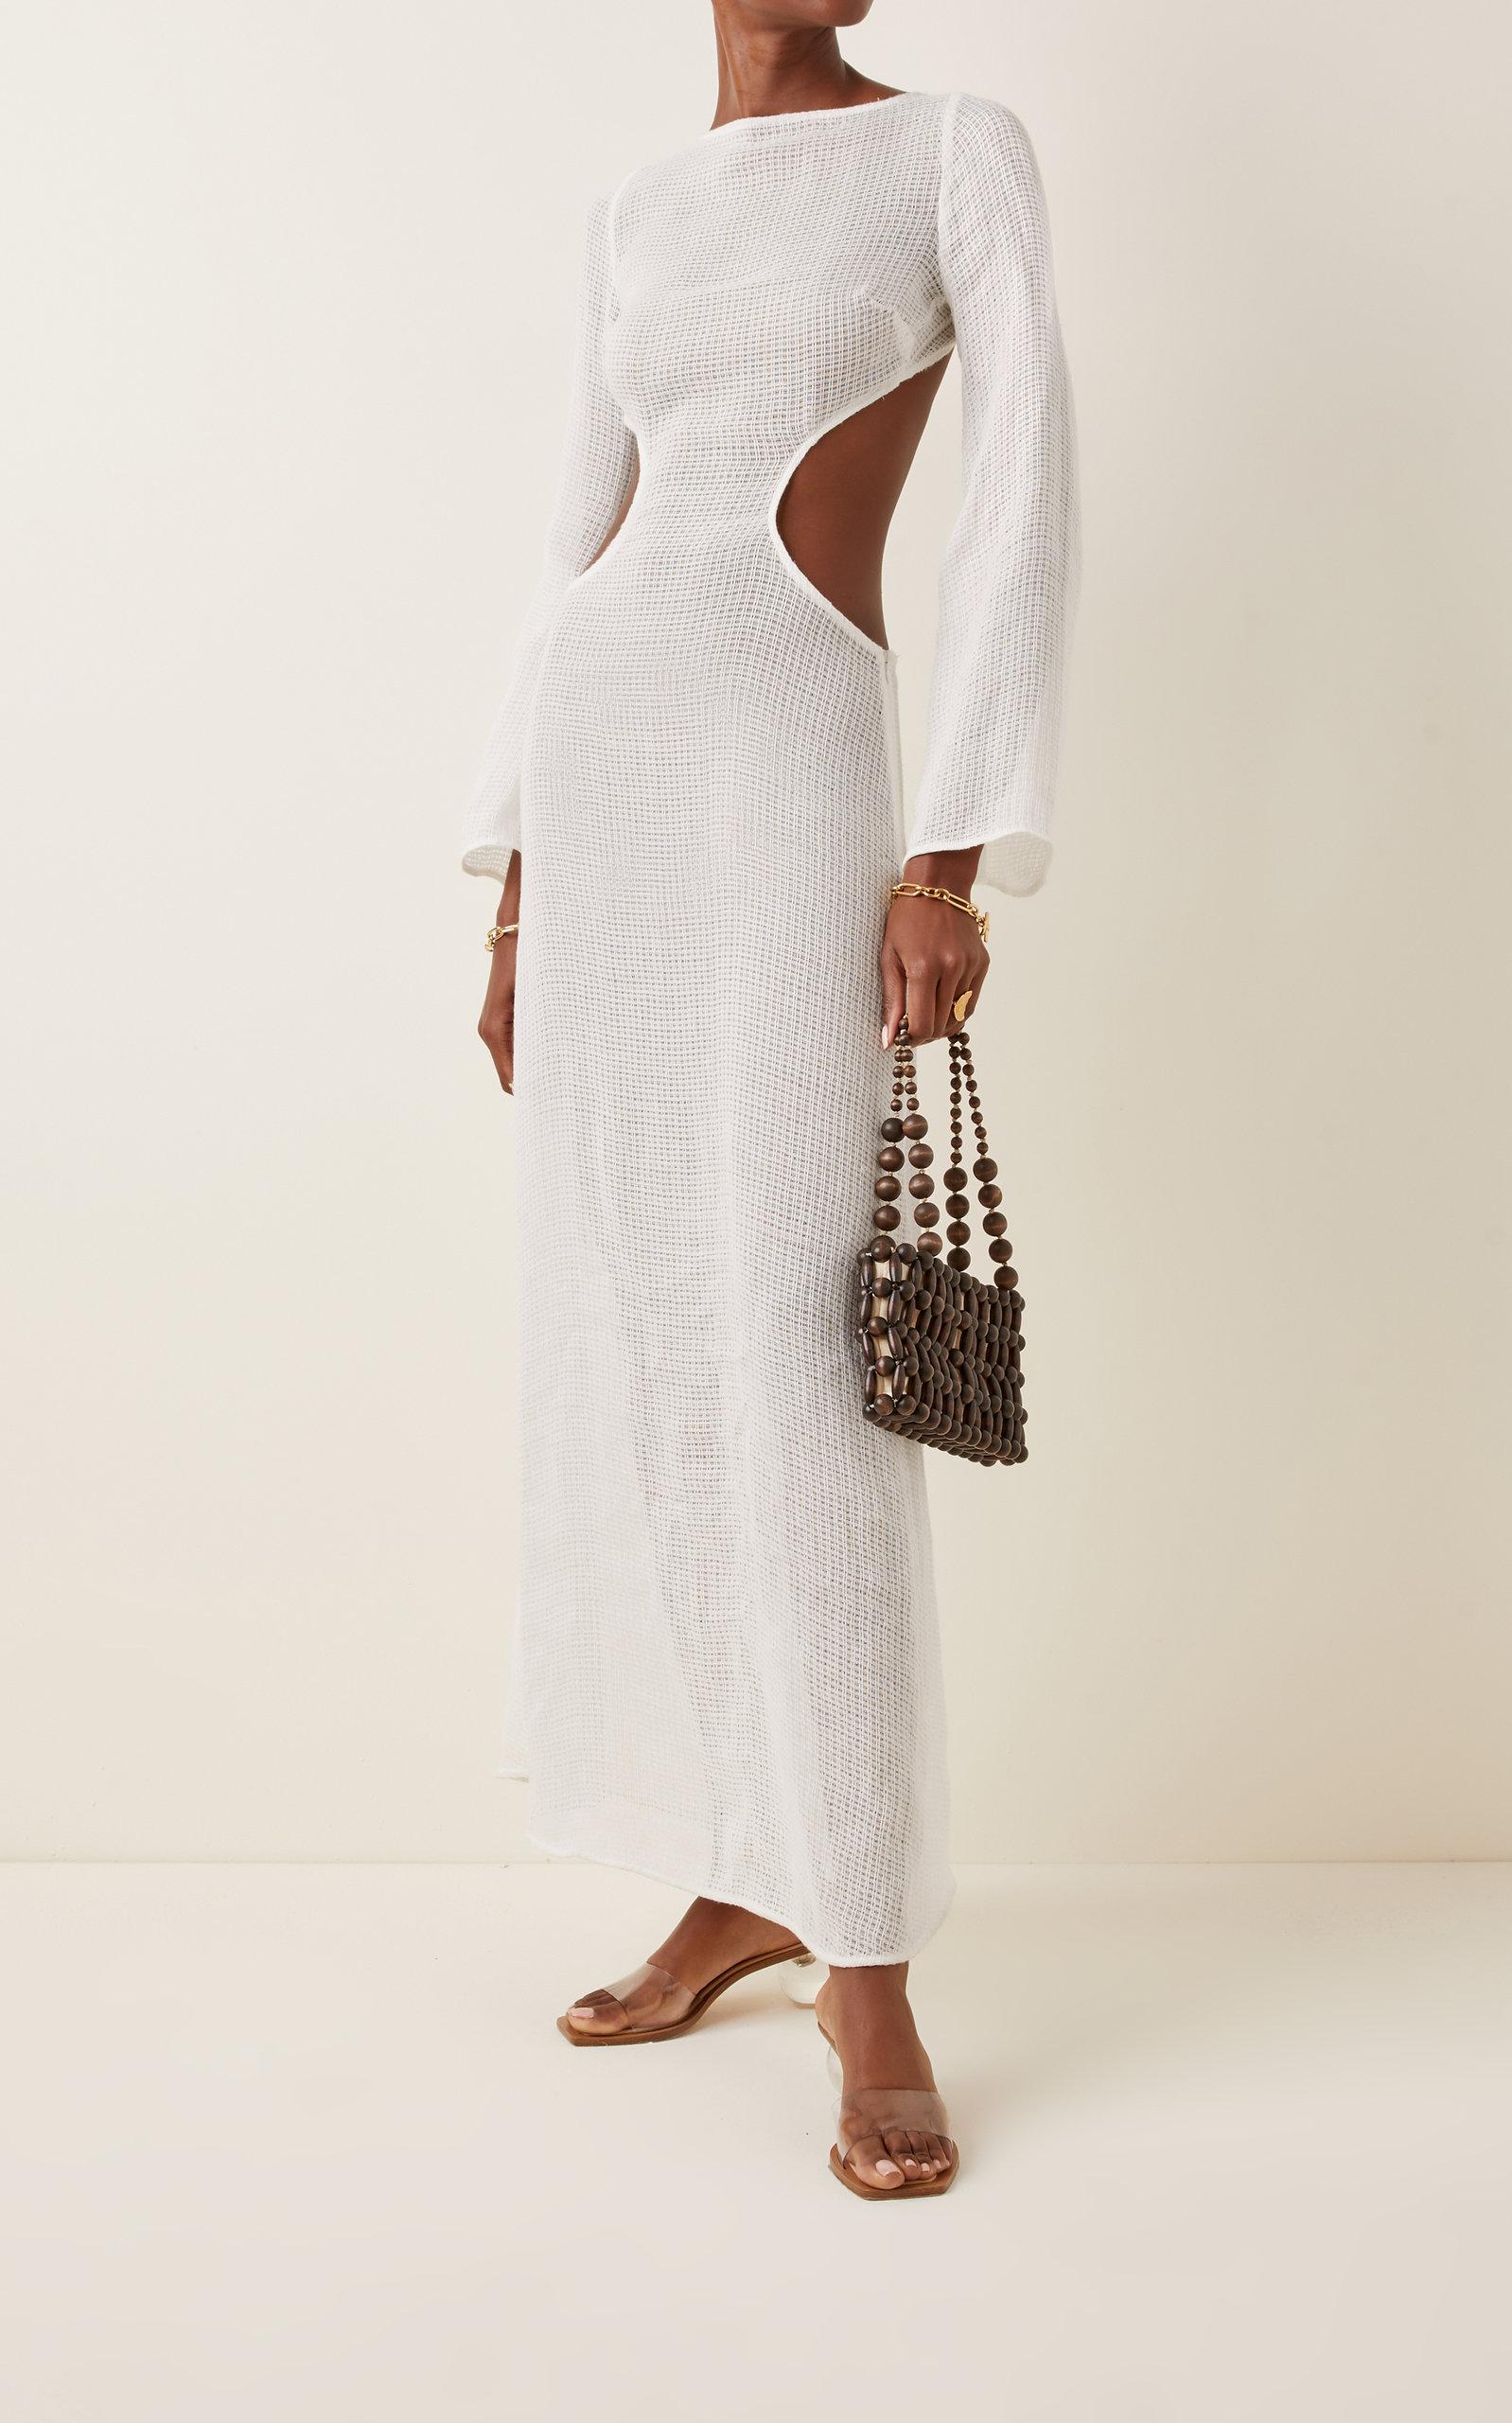 Cult Gaia Kamira Cotton-mesh Cover-up Dress in White | Lyst